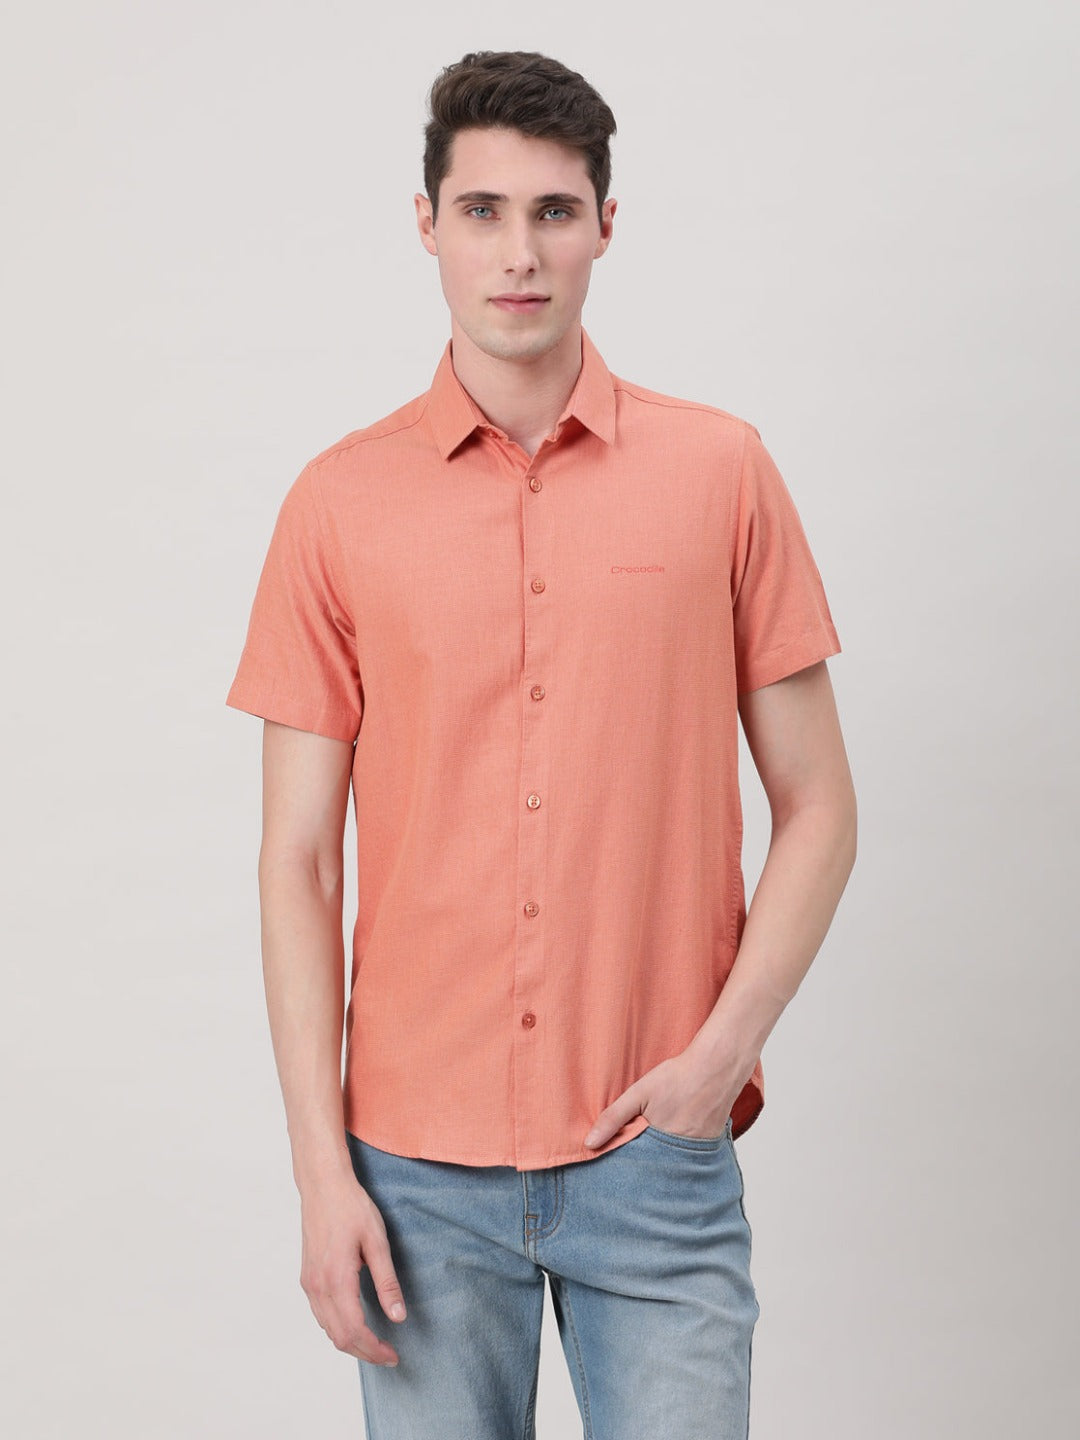 Casual Peach Half Sleeve Comfort Fit Solid Shirt with Collar for Men